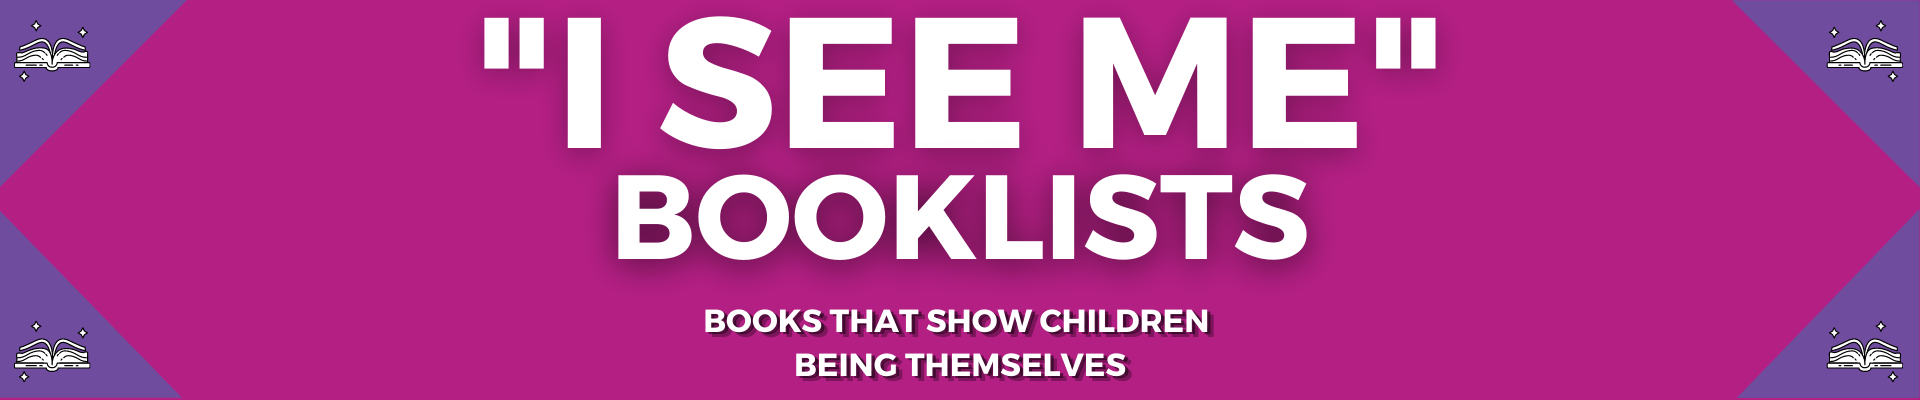 Booklists for kids that show kids being themselves!